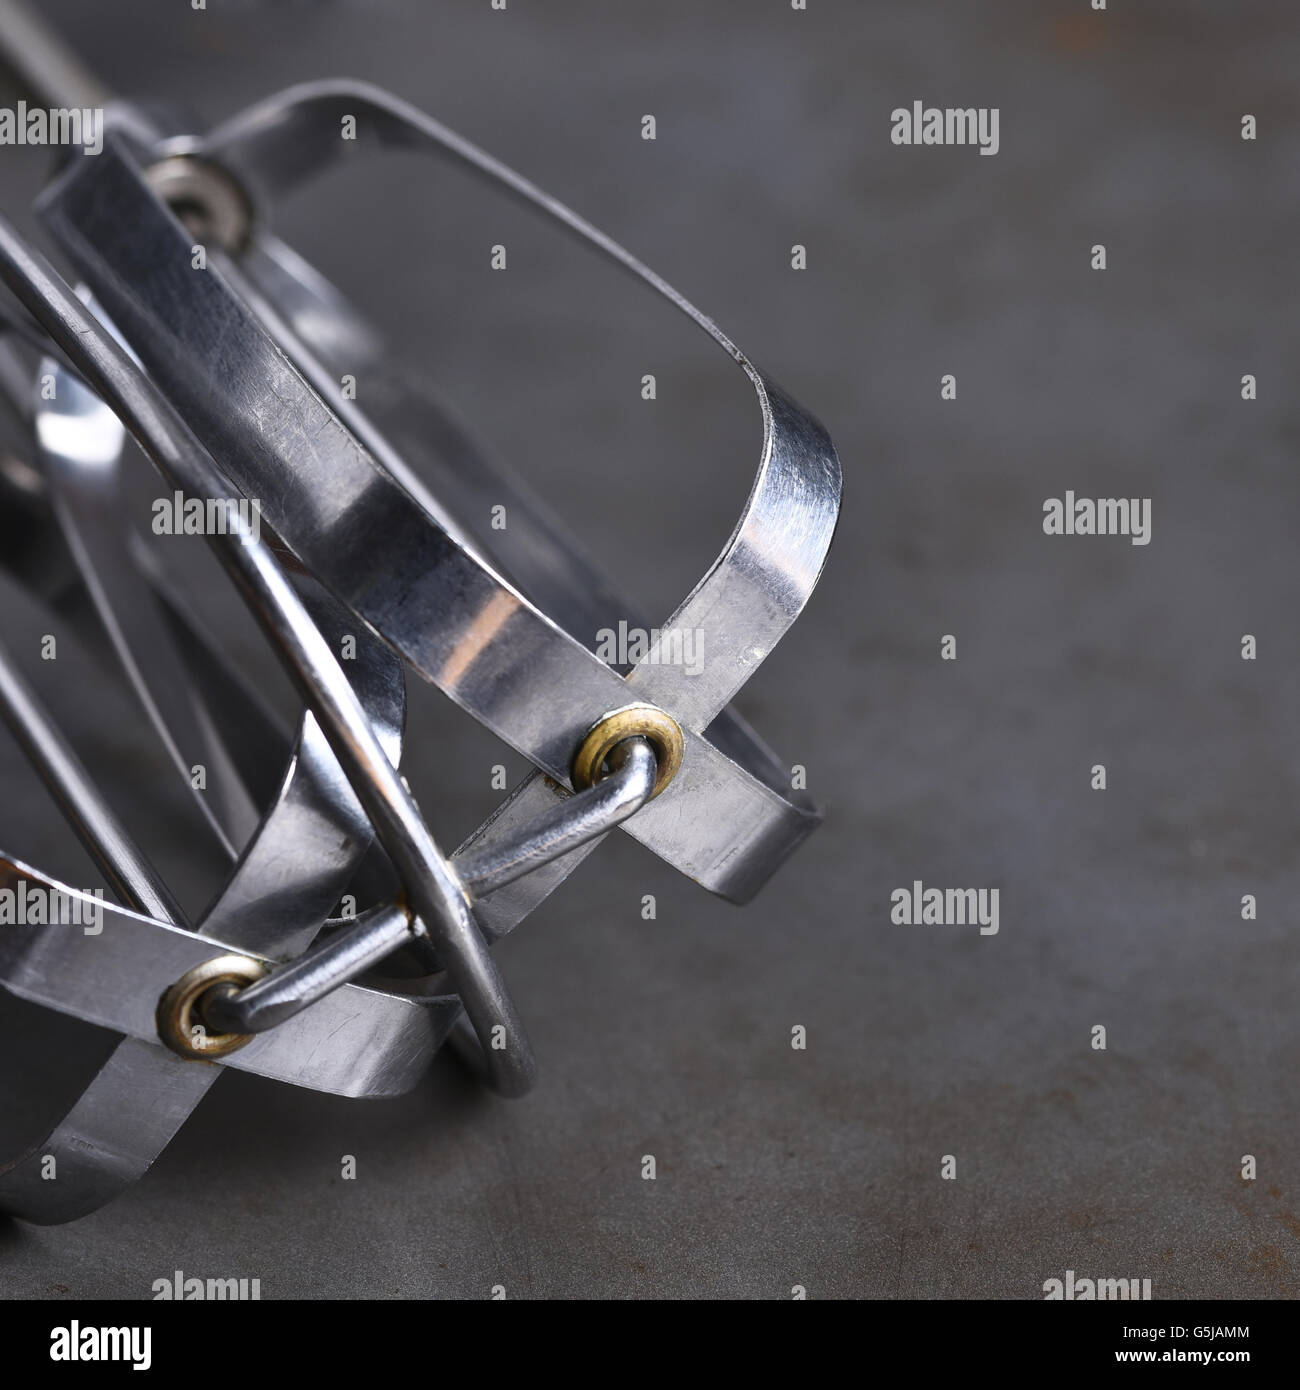 Closeup of the blades of an old hand mixer. Stock Photo